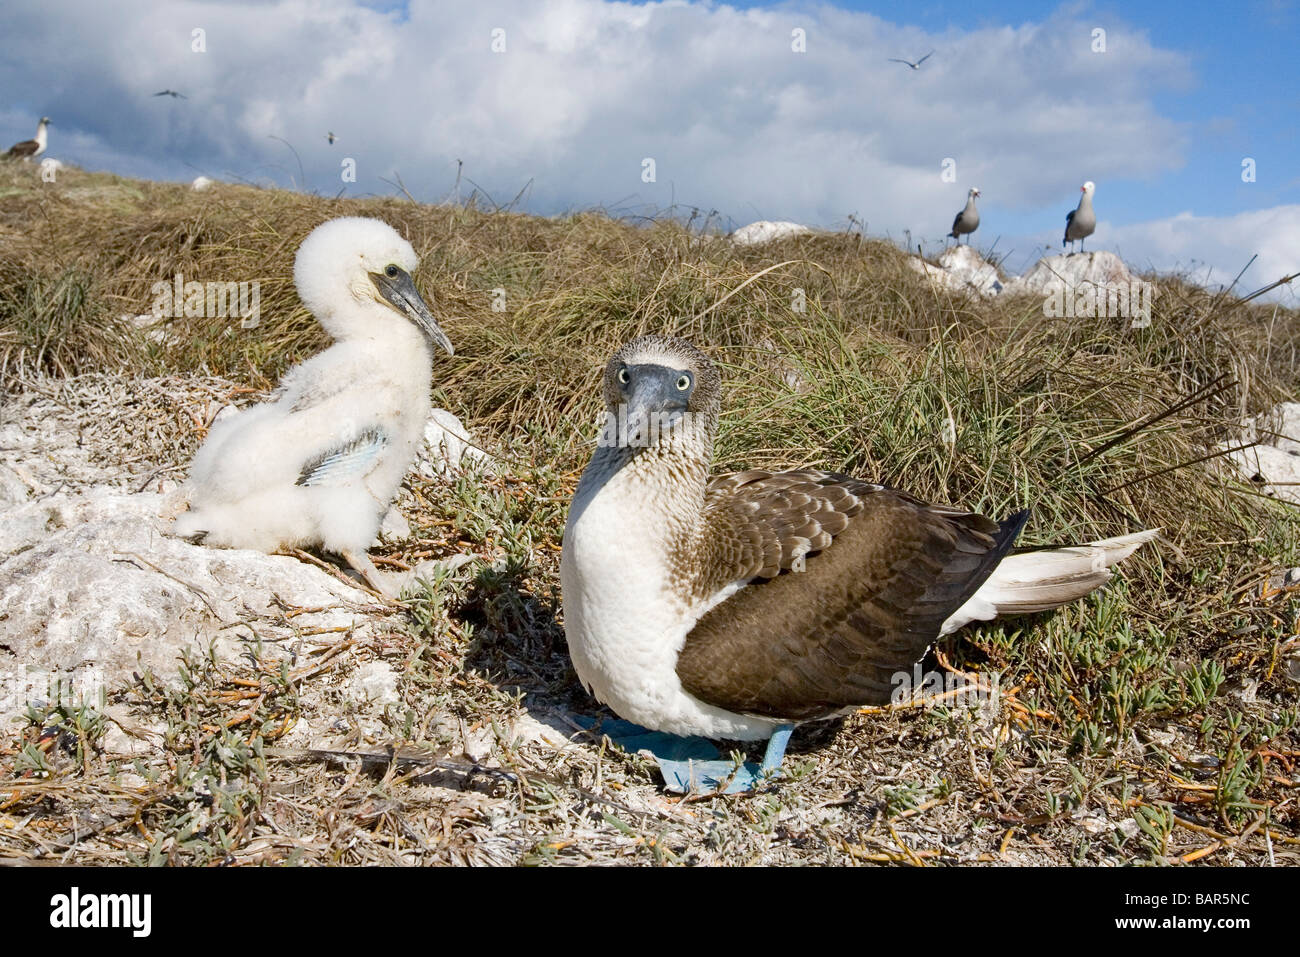 Blue-footed Booby with downy chick in rock nest. Stock Photo